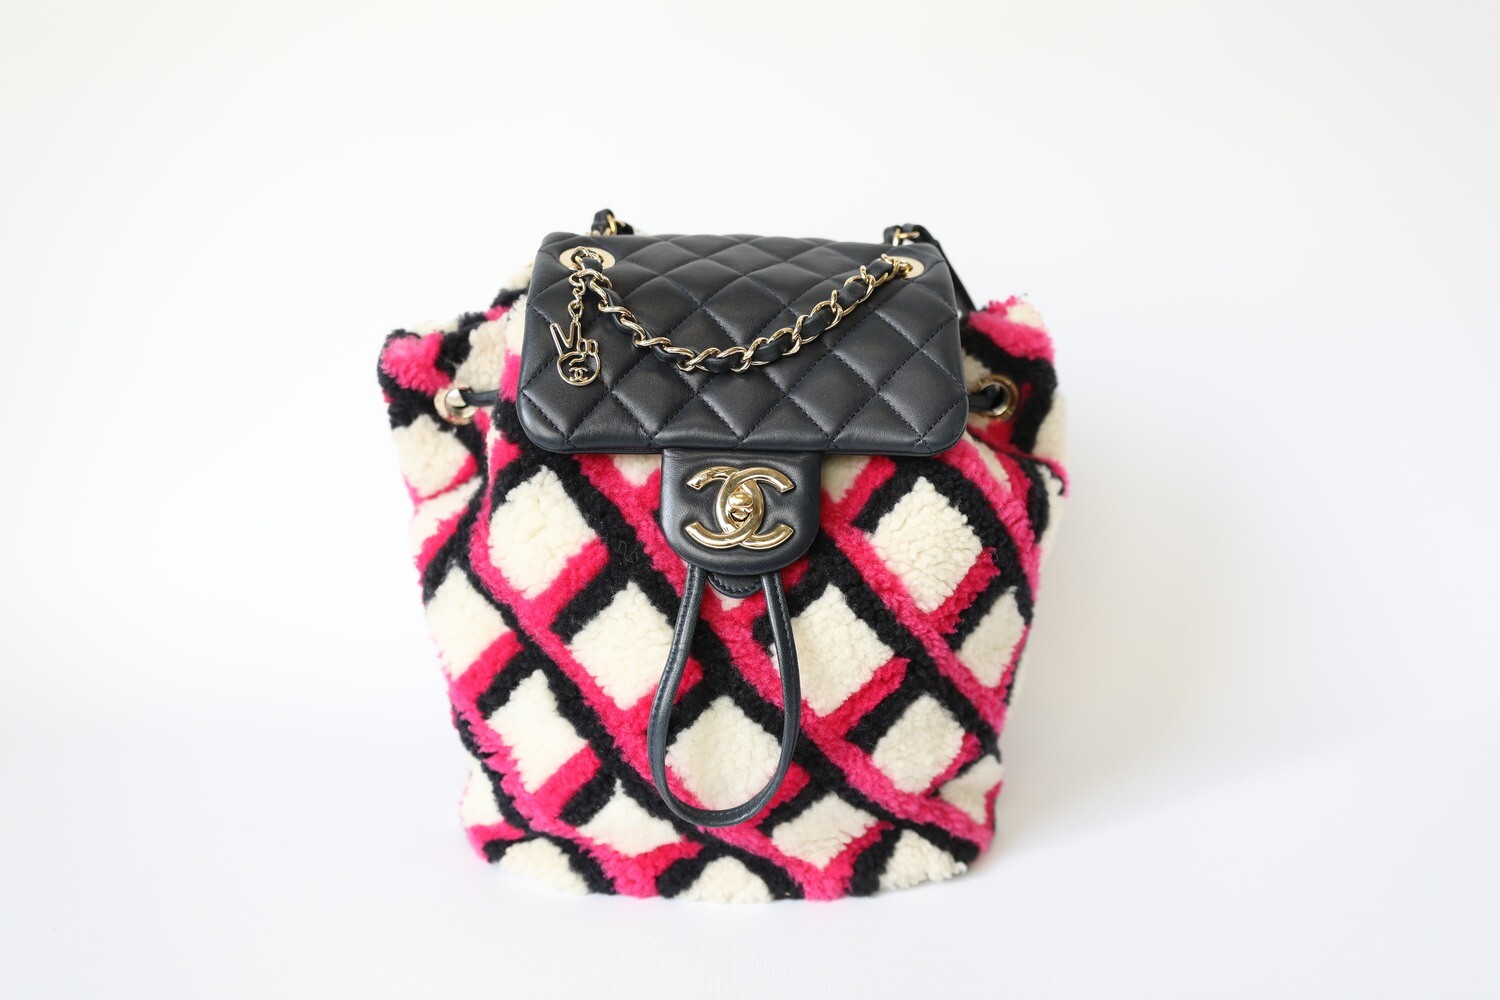 Chanel Urban Spirit Backpack Small, Shearling With Quilted Lambskin Pink  And Navy With Gold Hardware, Preowned No Dustbag WA001 - Julia Rose Boston